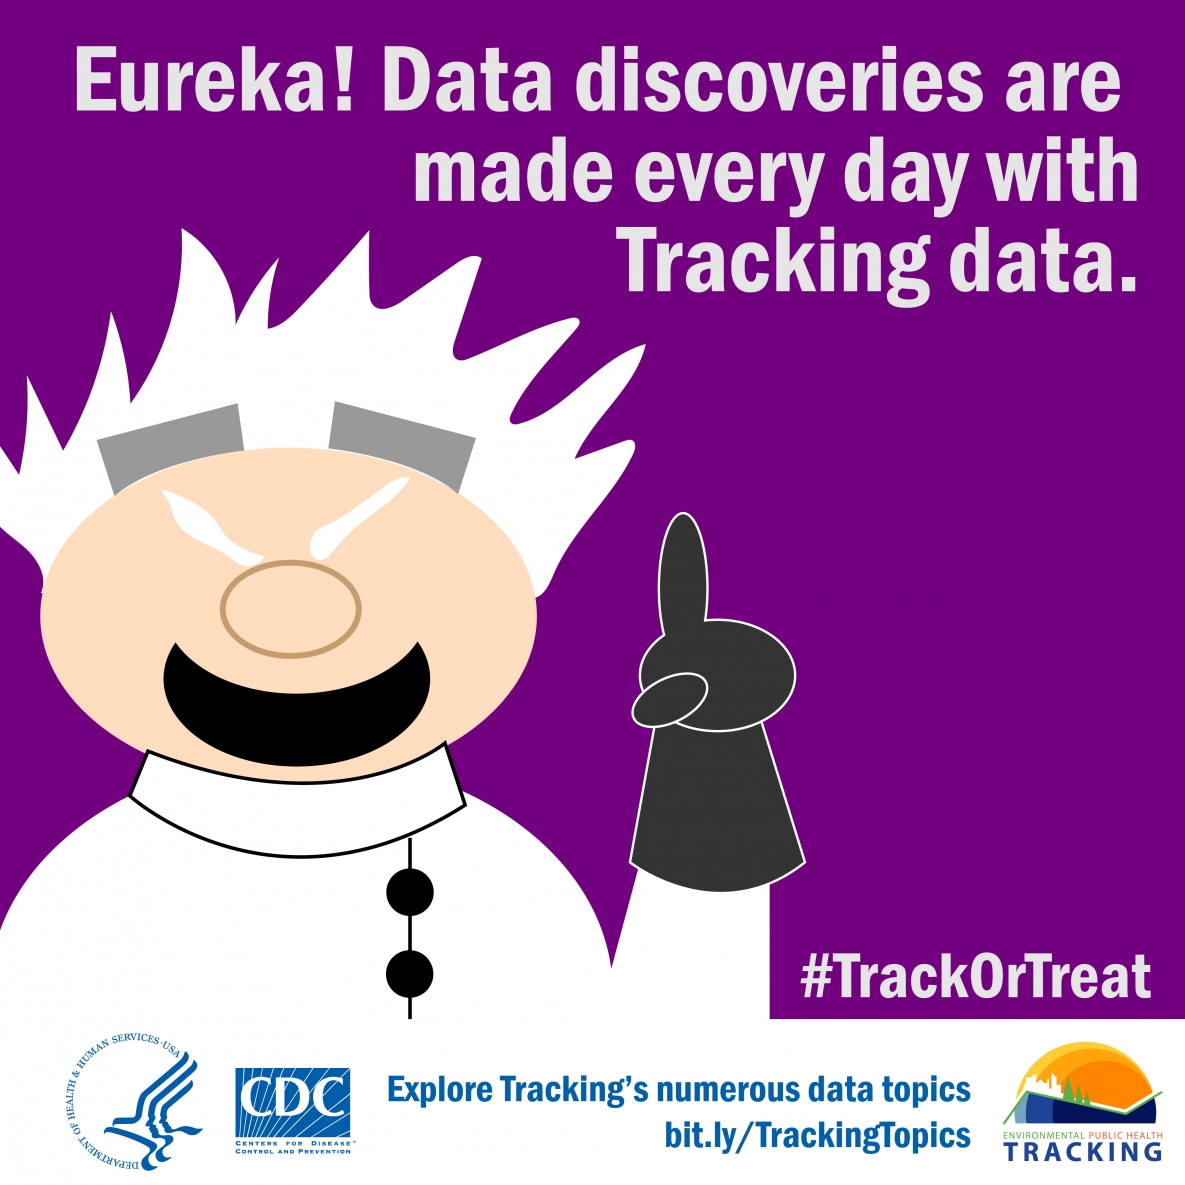 Mad scientist graphic with text: "Eureka! Data discoveries are made every day with Tracking data."